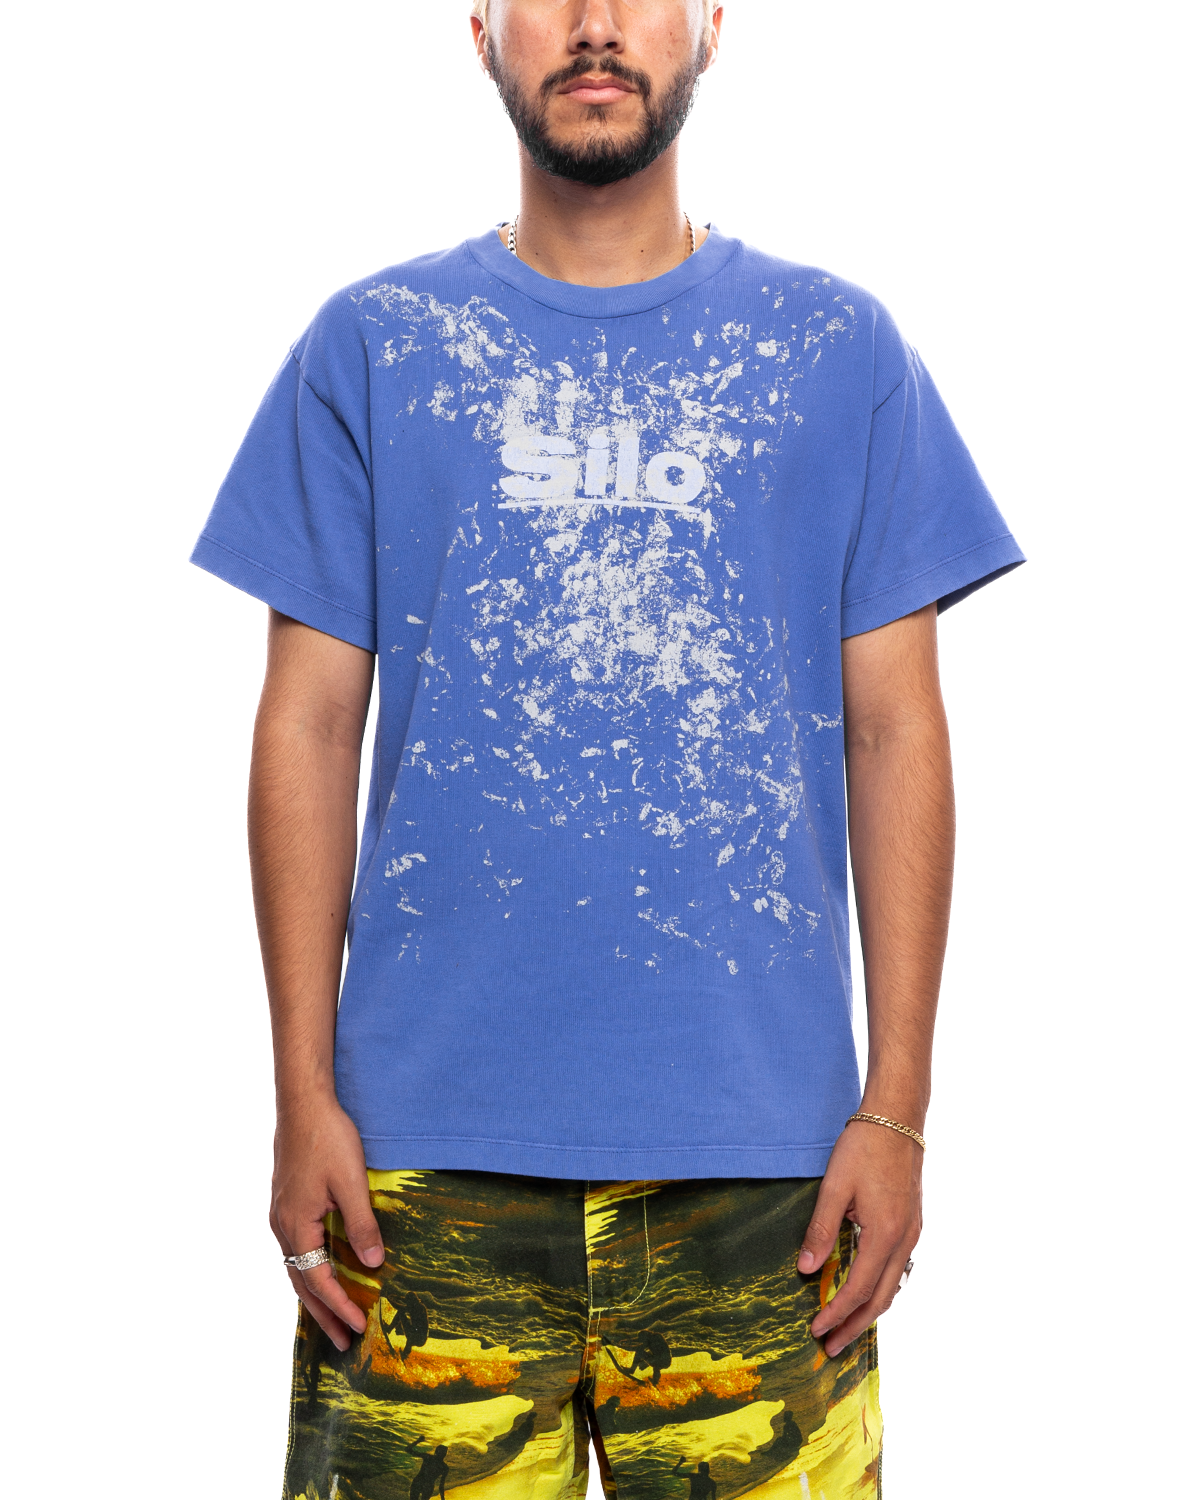 Stained T Shirt Blue